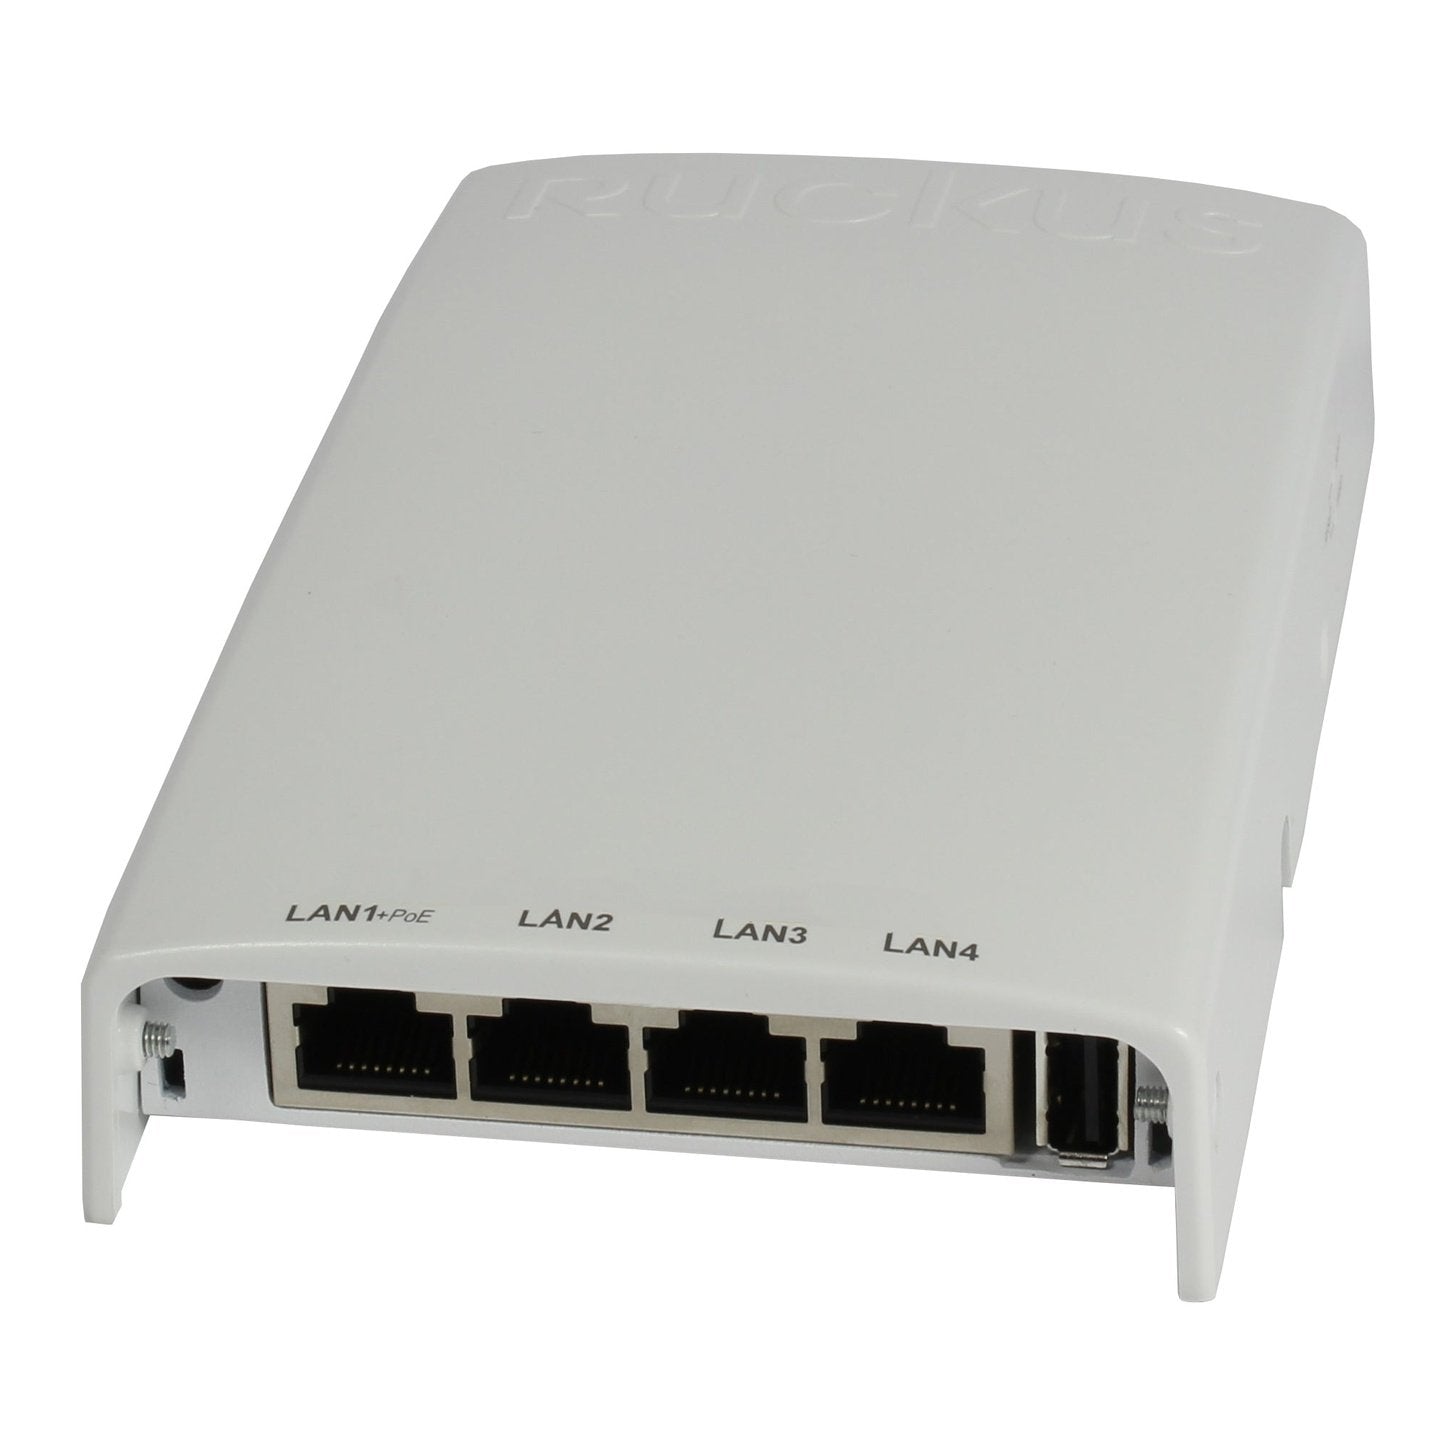 CommScopeRUCKUSZoneFlexH510-802.11acWAVE2MU-MIMO CommScope RUCKUS ZoneFlex H510- 802.11ac WAVE 2 MU-MIMO Dual-Band simultan 2,4 GHz & 5 GHz router commscope Ruckus switches WIFI wifi 6 router WLAN WLAN-Router